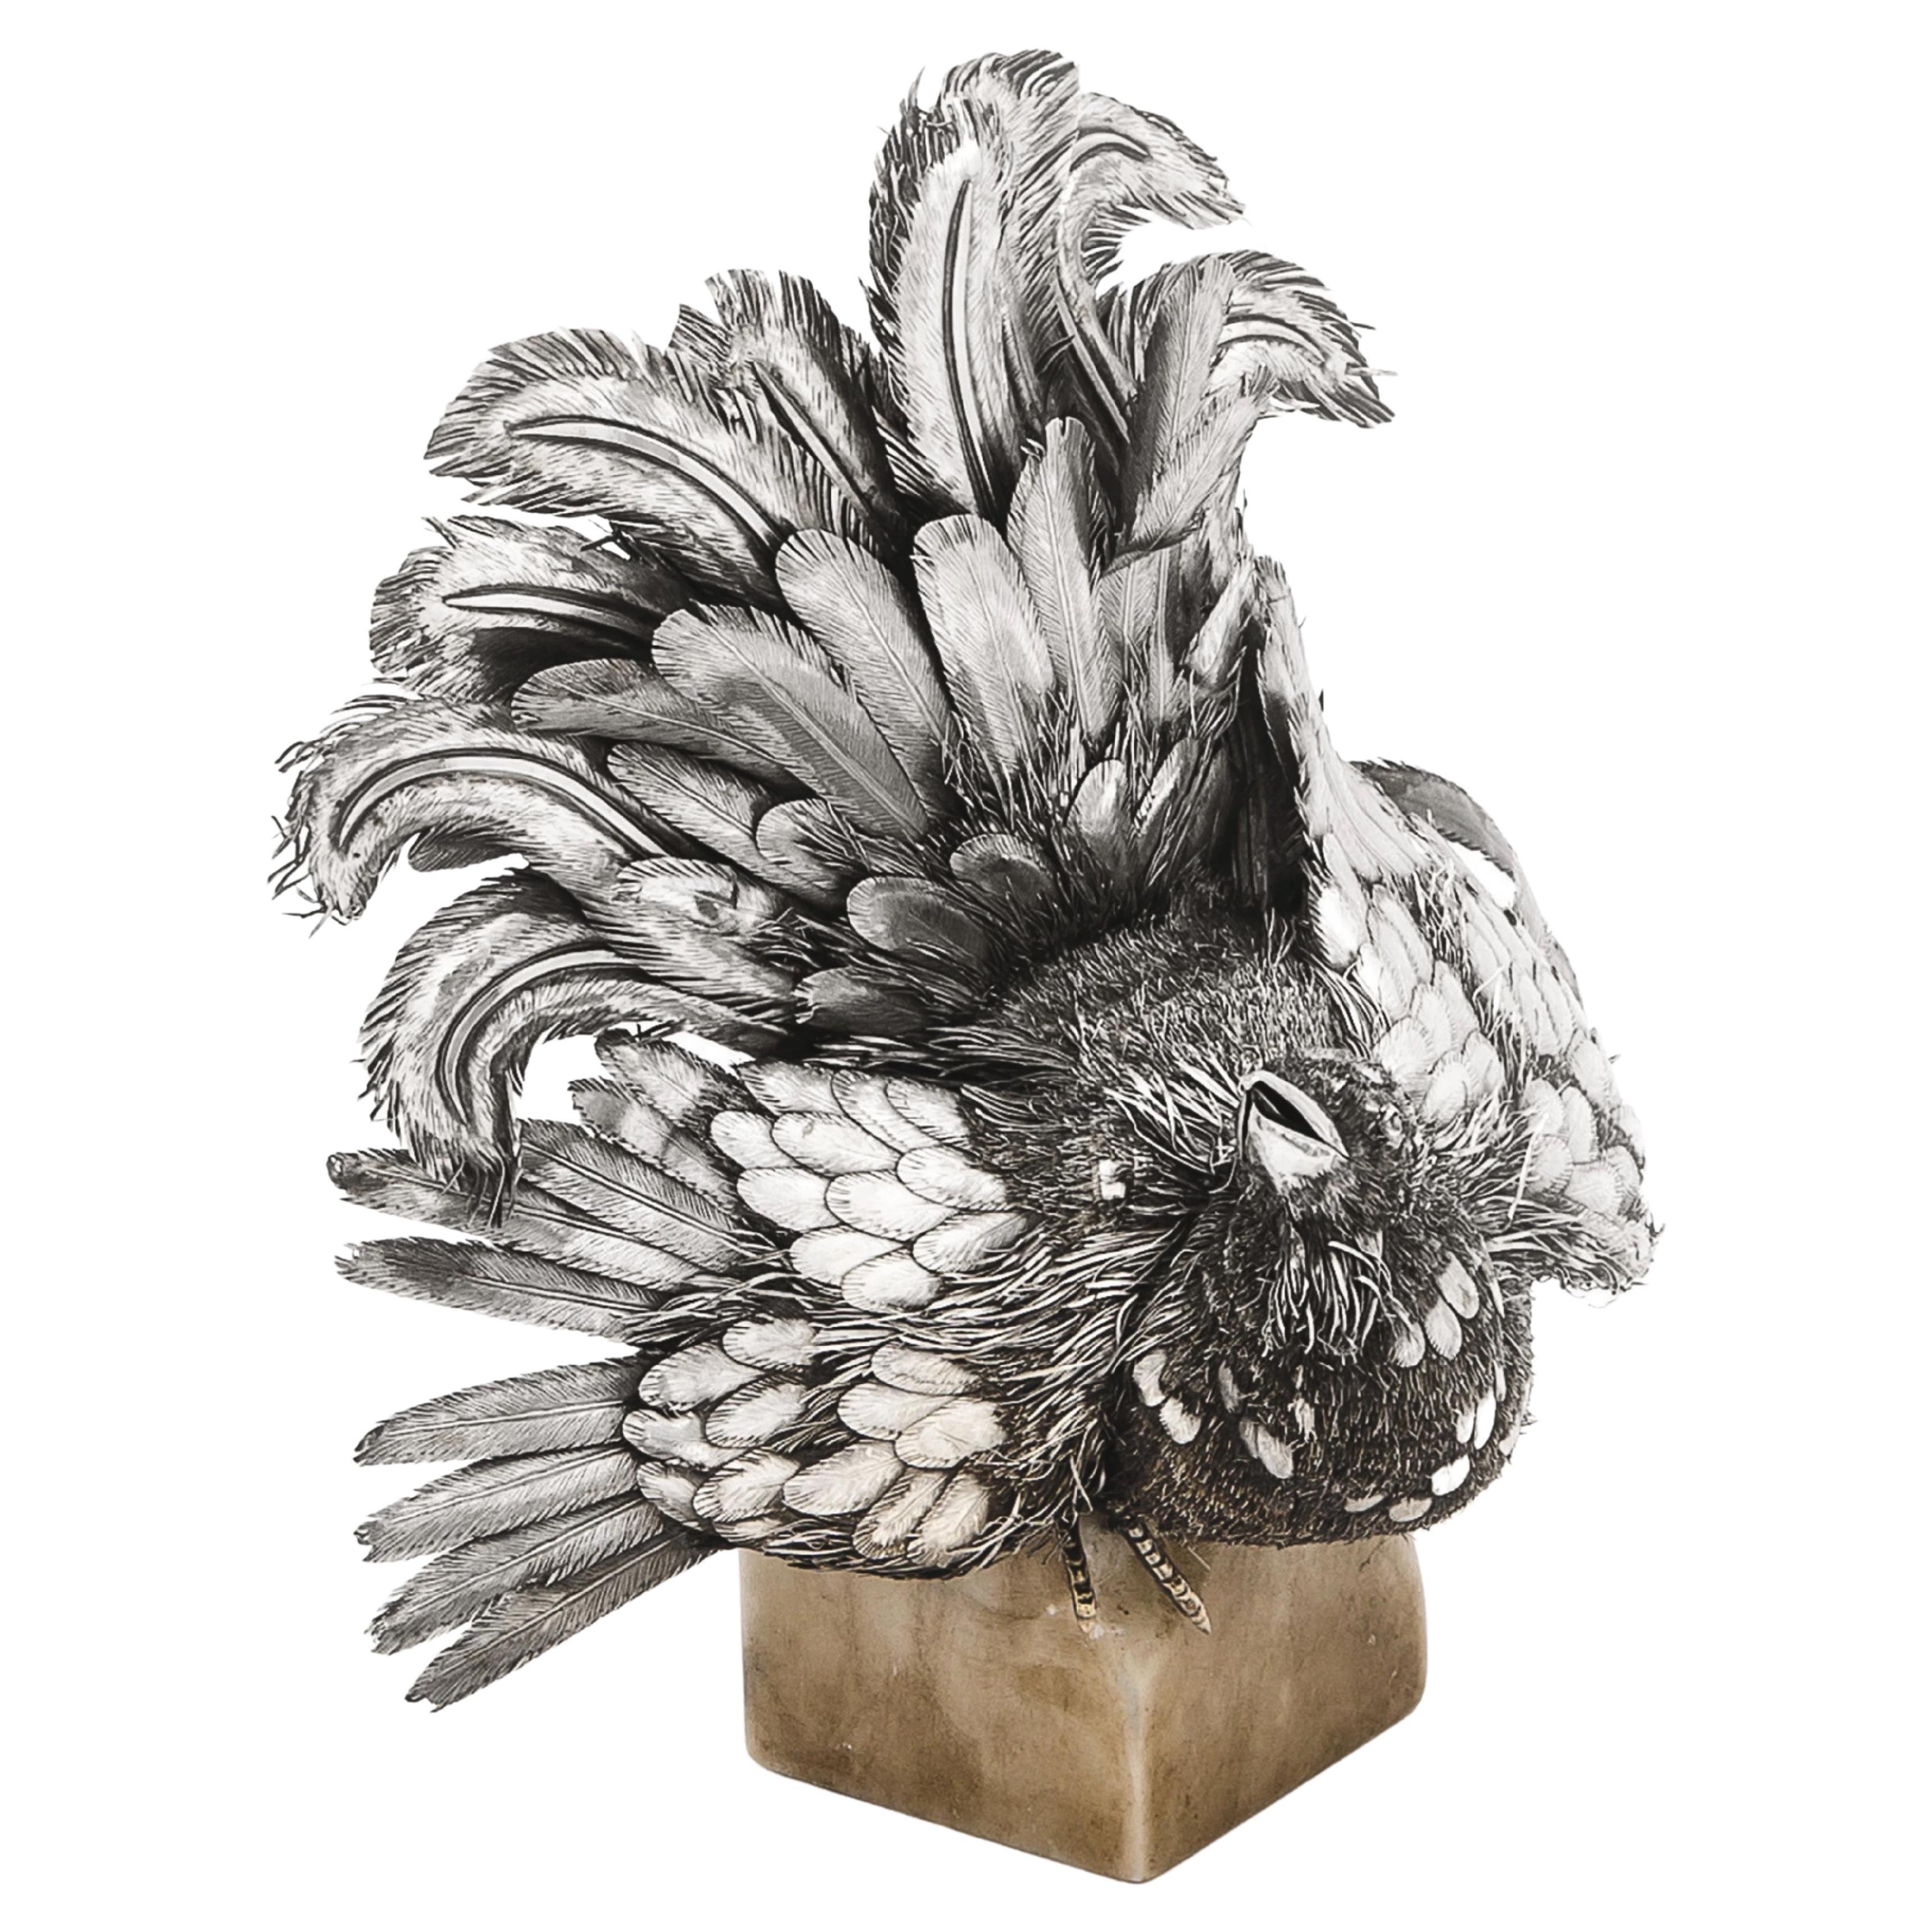 Attributed to Buccellati, 20th Century Sterling Silver Capercaillie